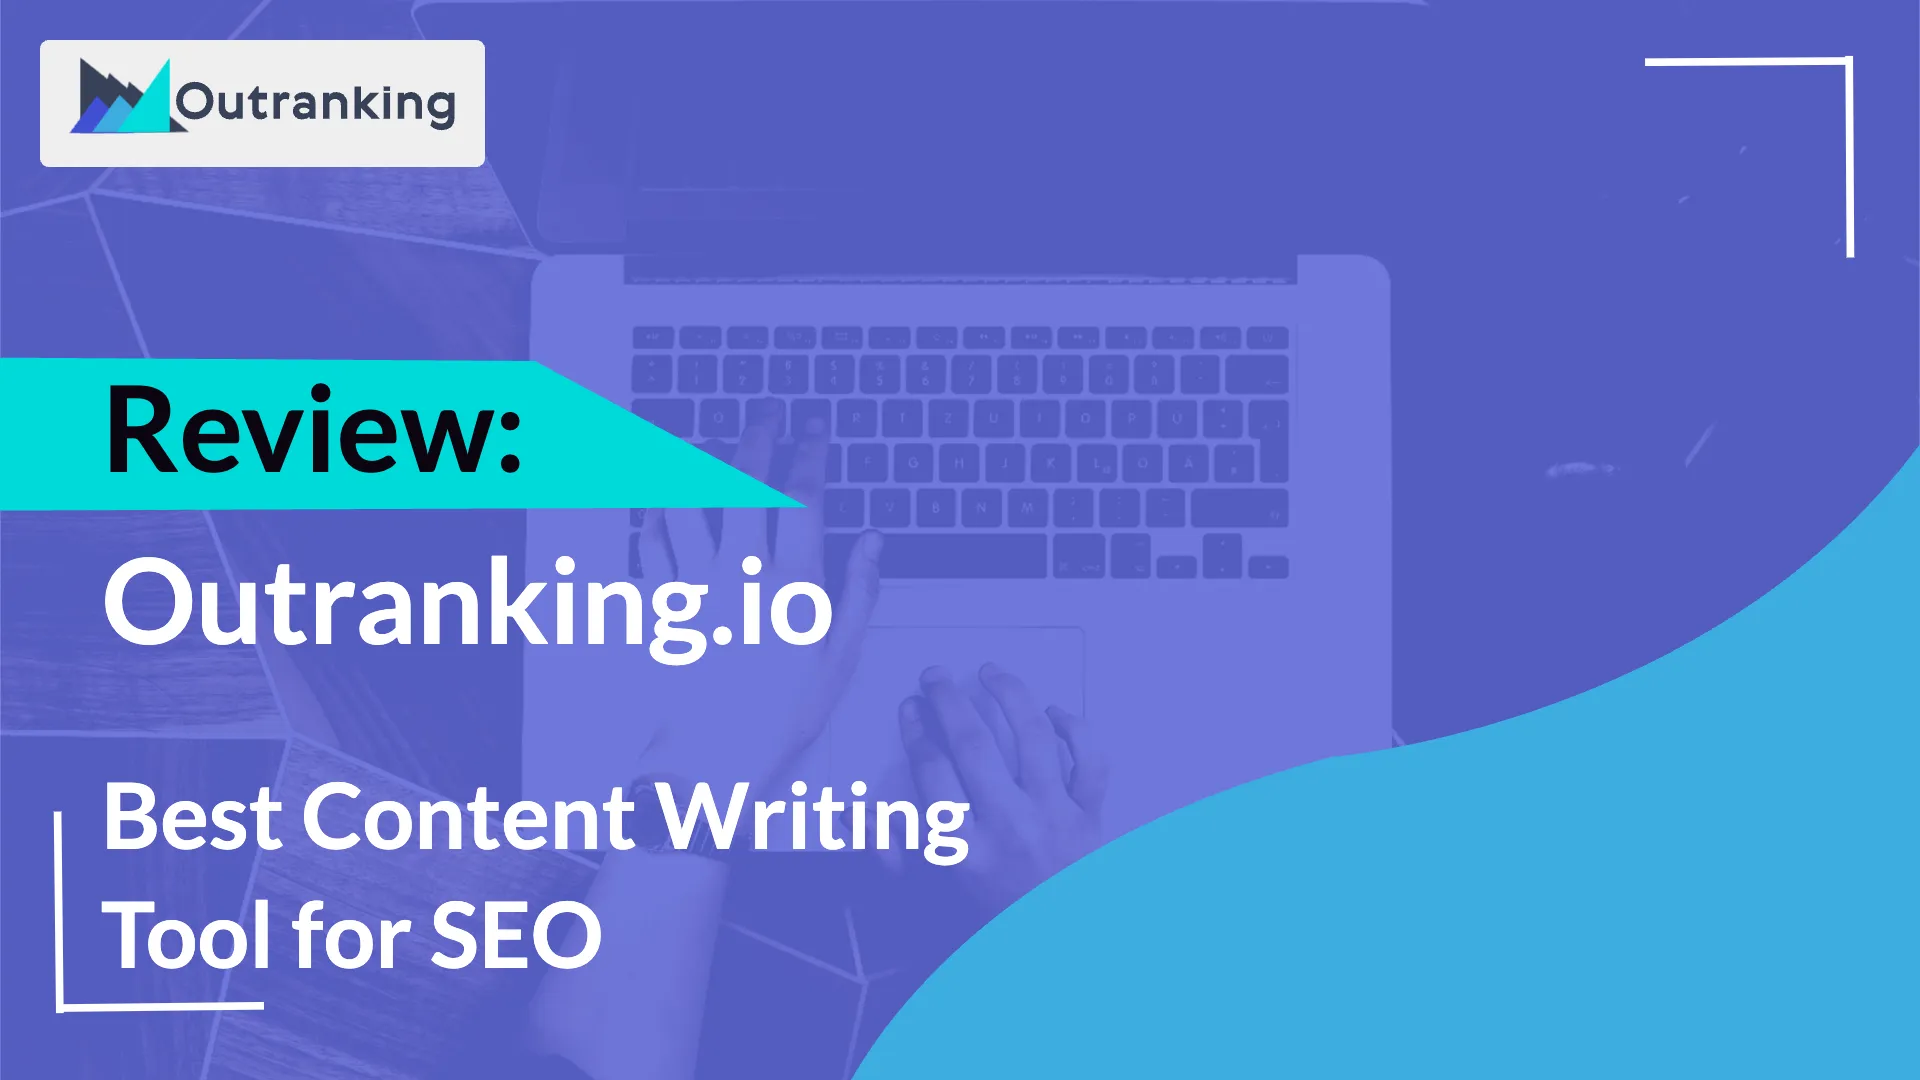 Outranking Review: best content writing tool for SEO